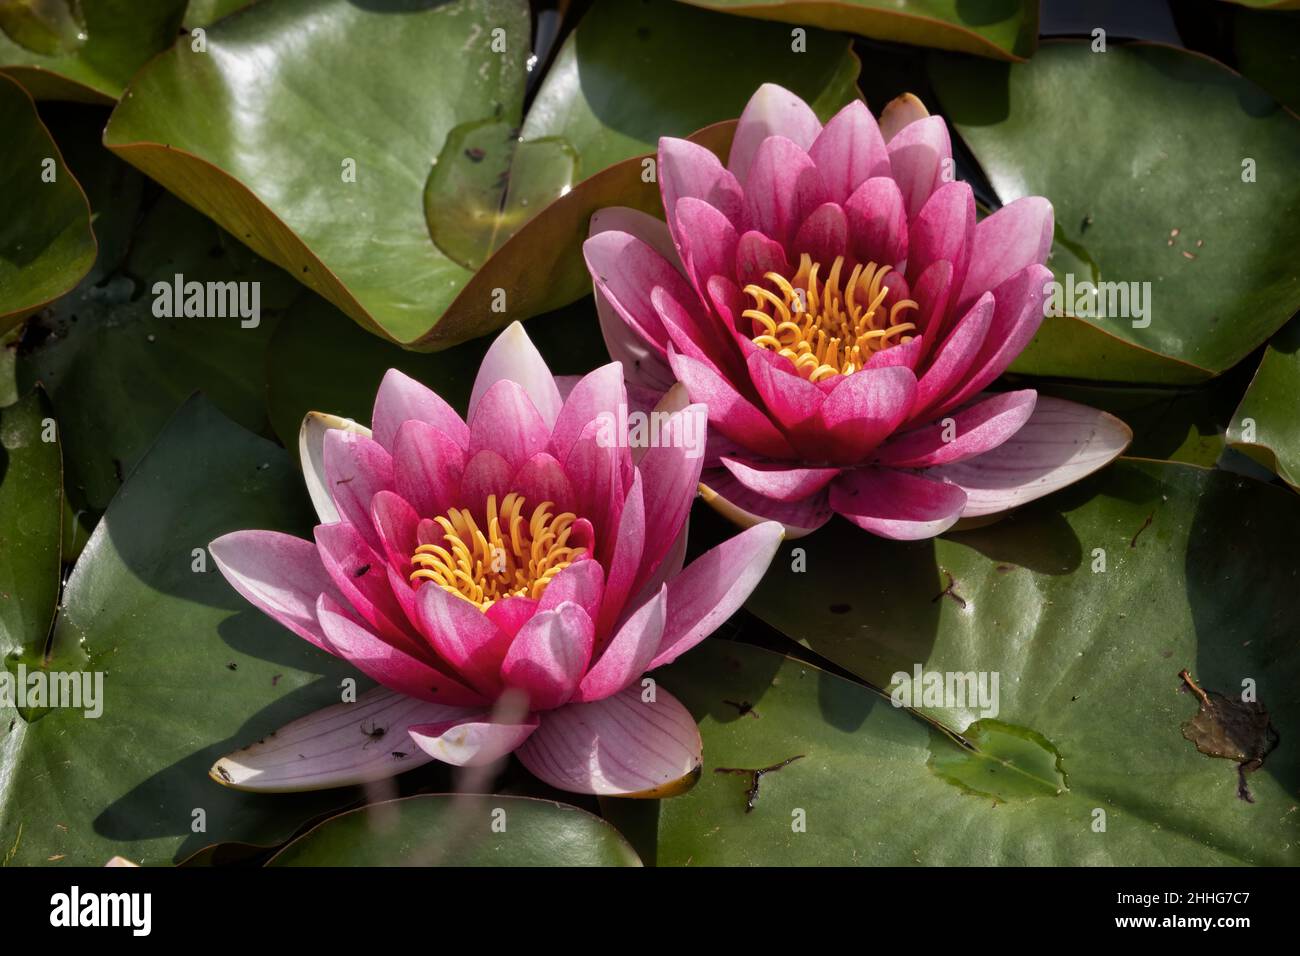 Water lily 'James Brydon' in bloom, deep pink flowering plant in the family Nymphaeaceae. Stock Photo